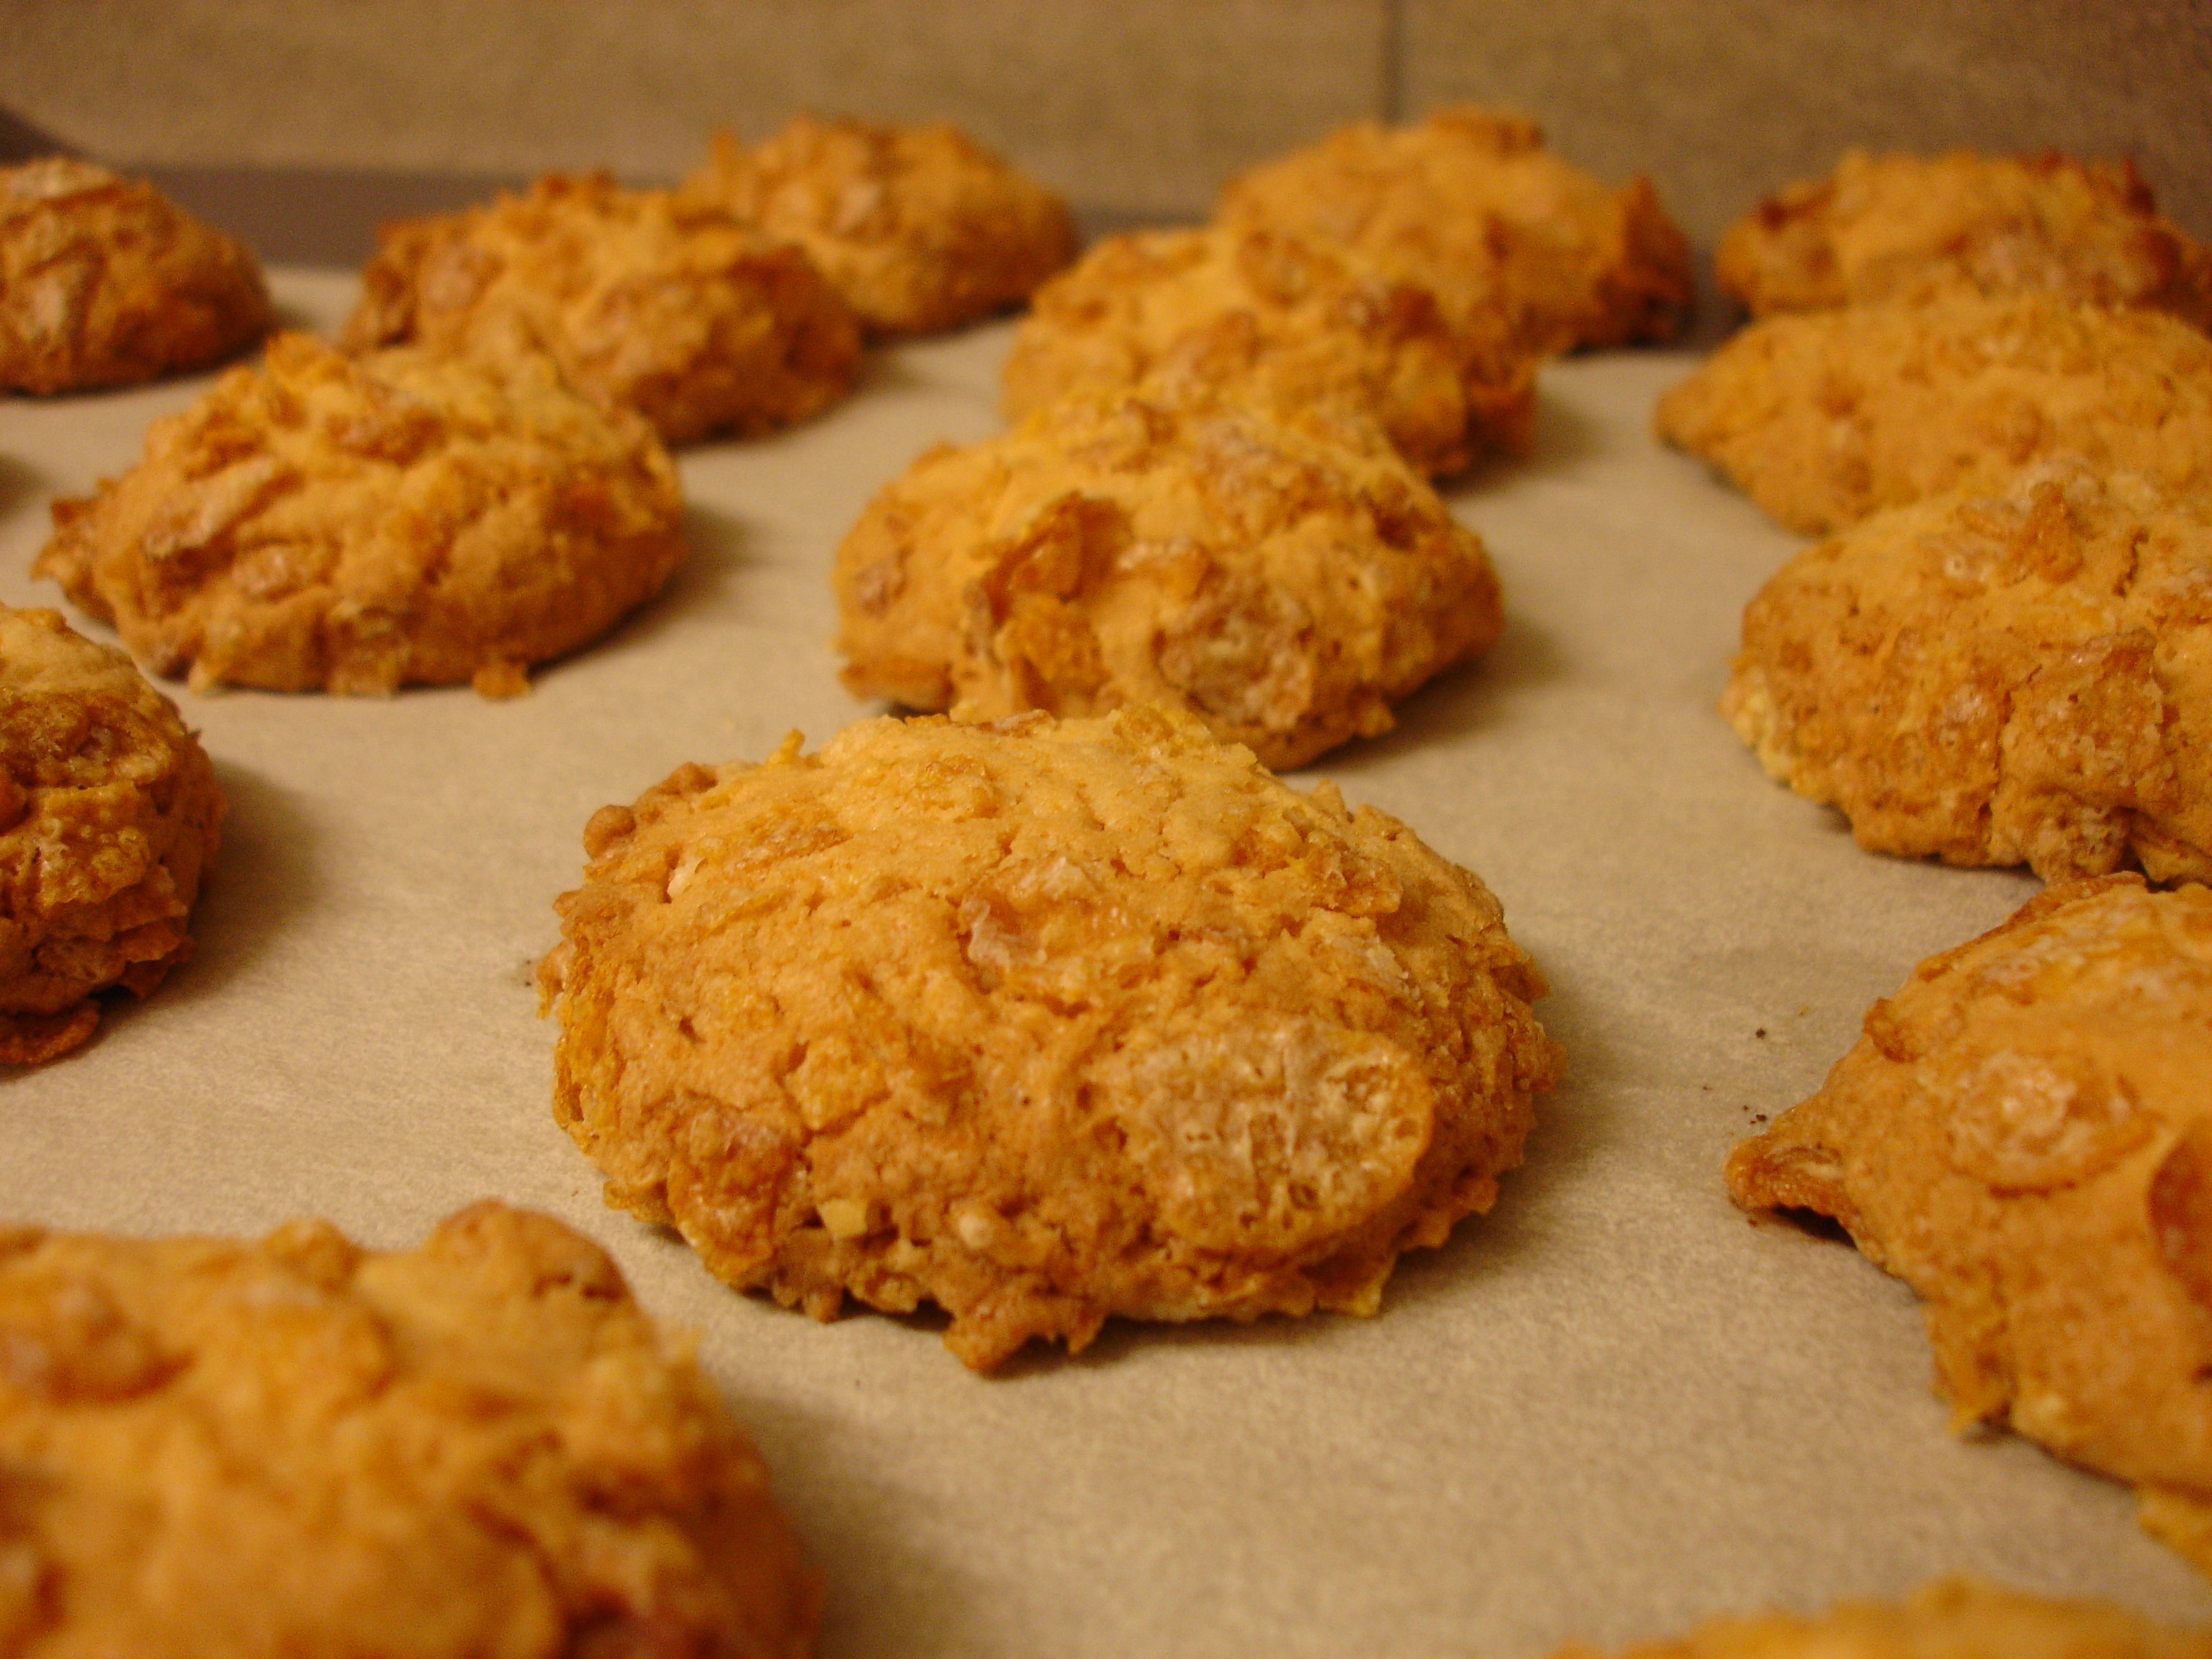 What is a good recipe for cookies made with cornflakes?